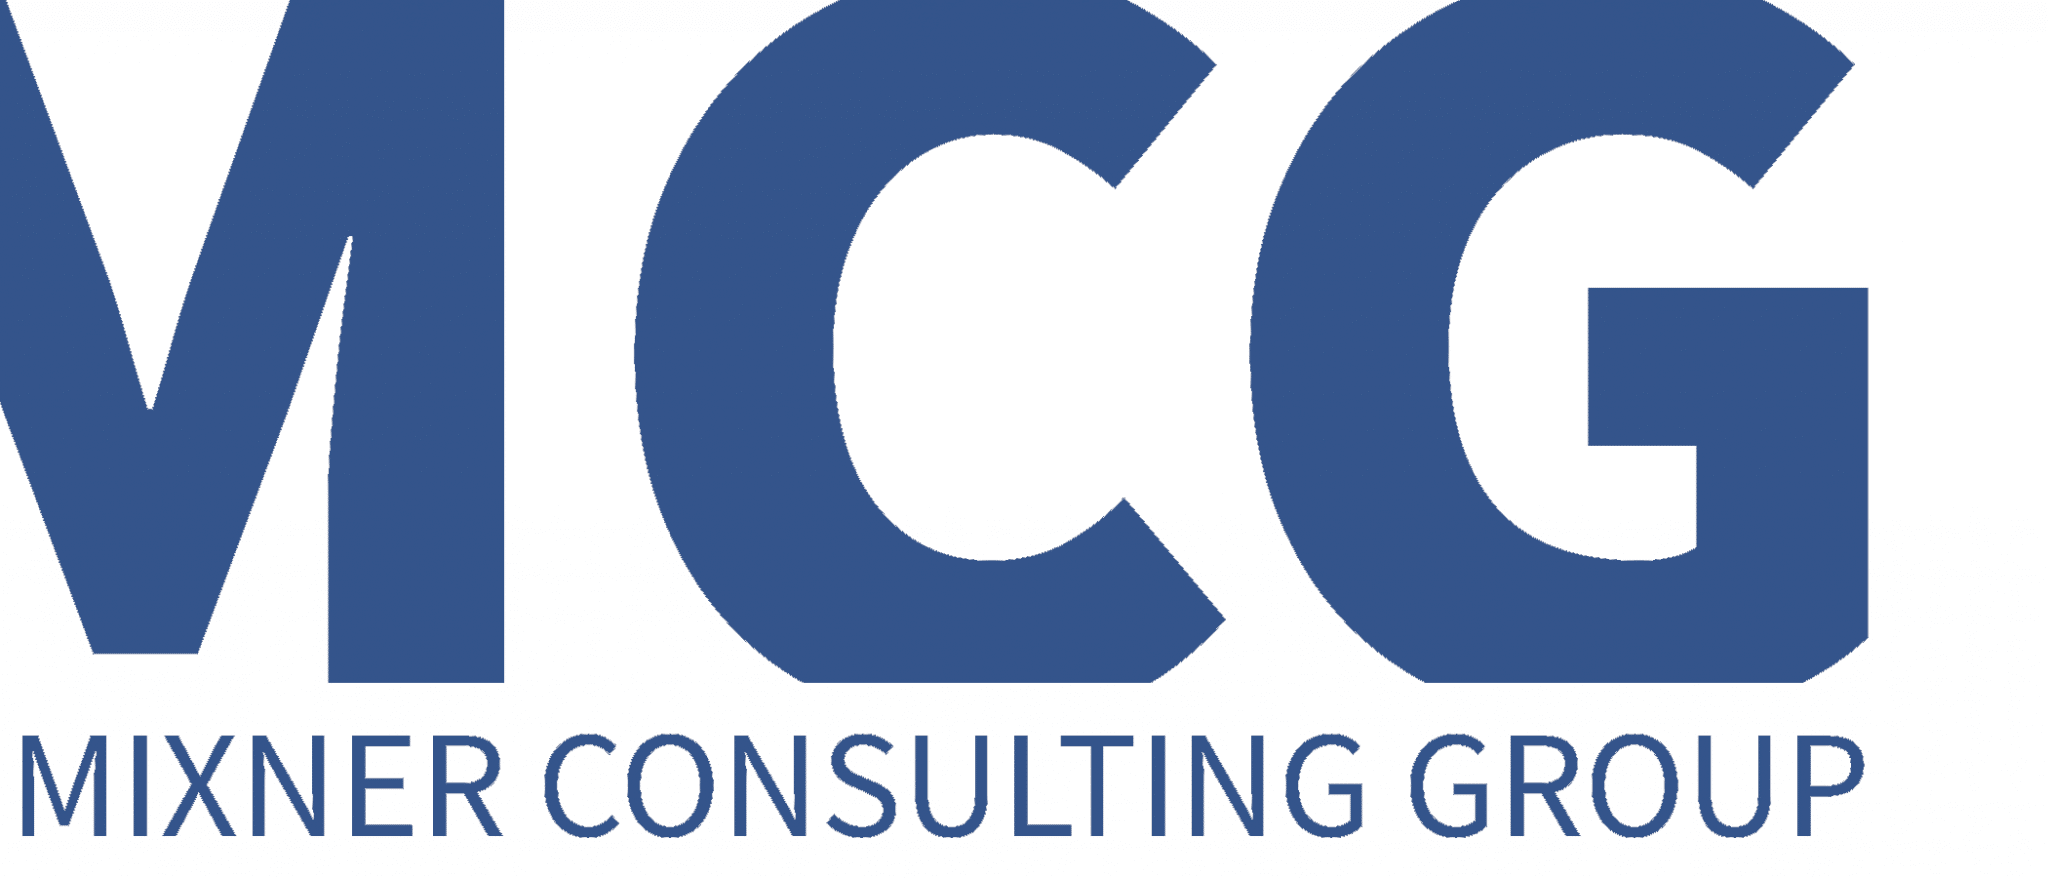 MCG New Logo With Tagline | Mixner Consulting